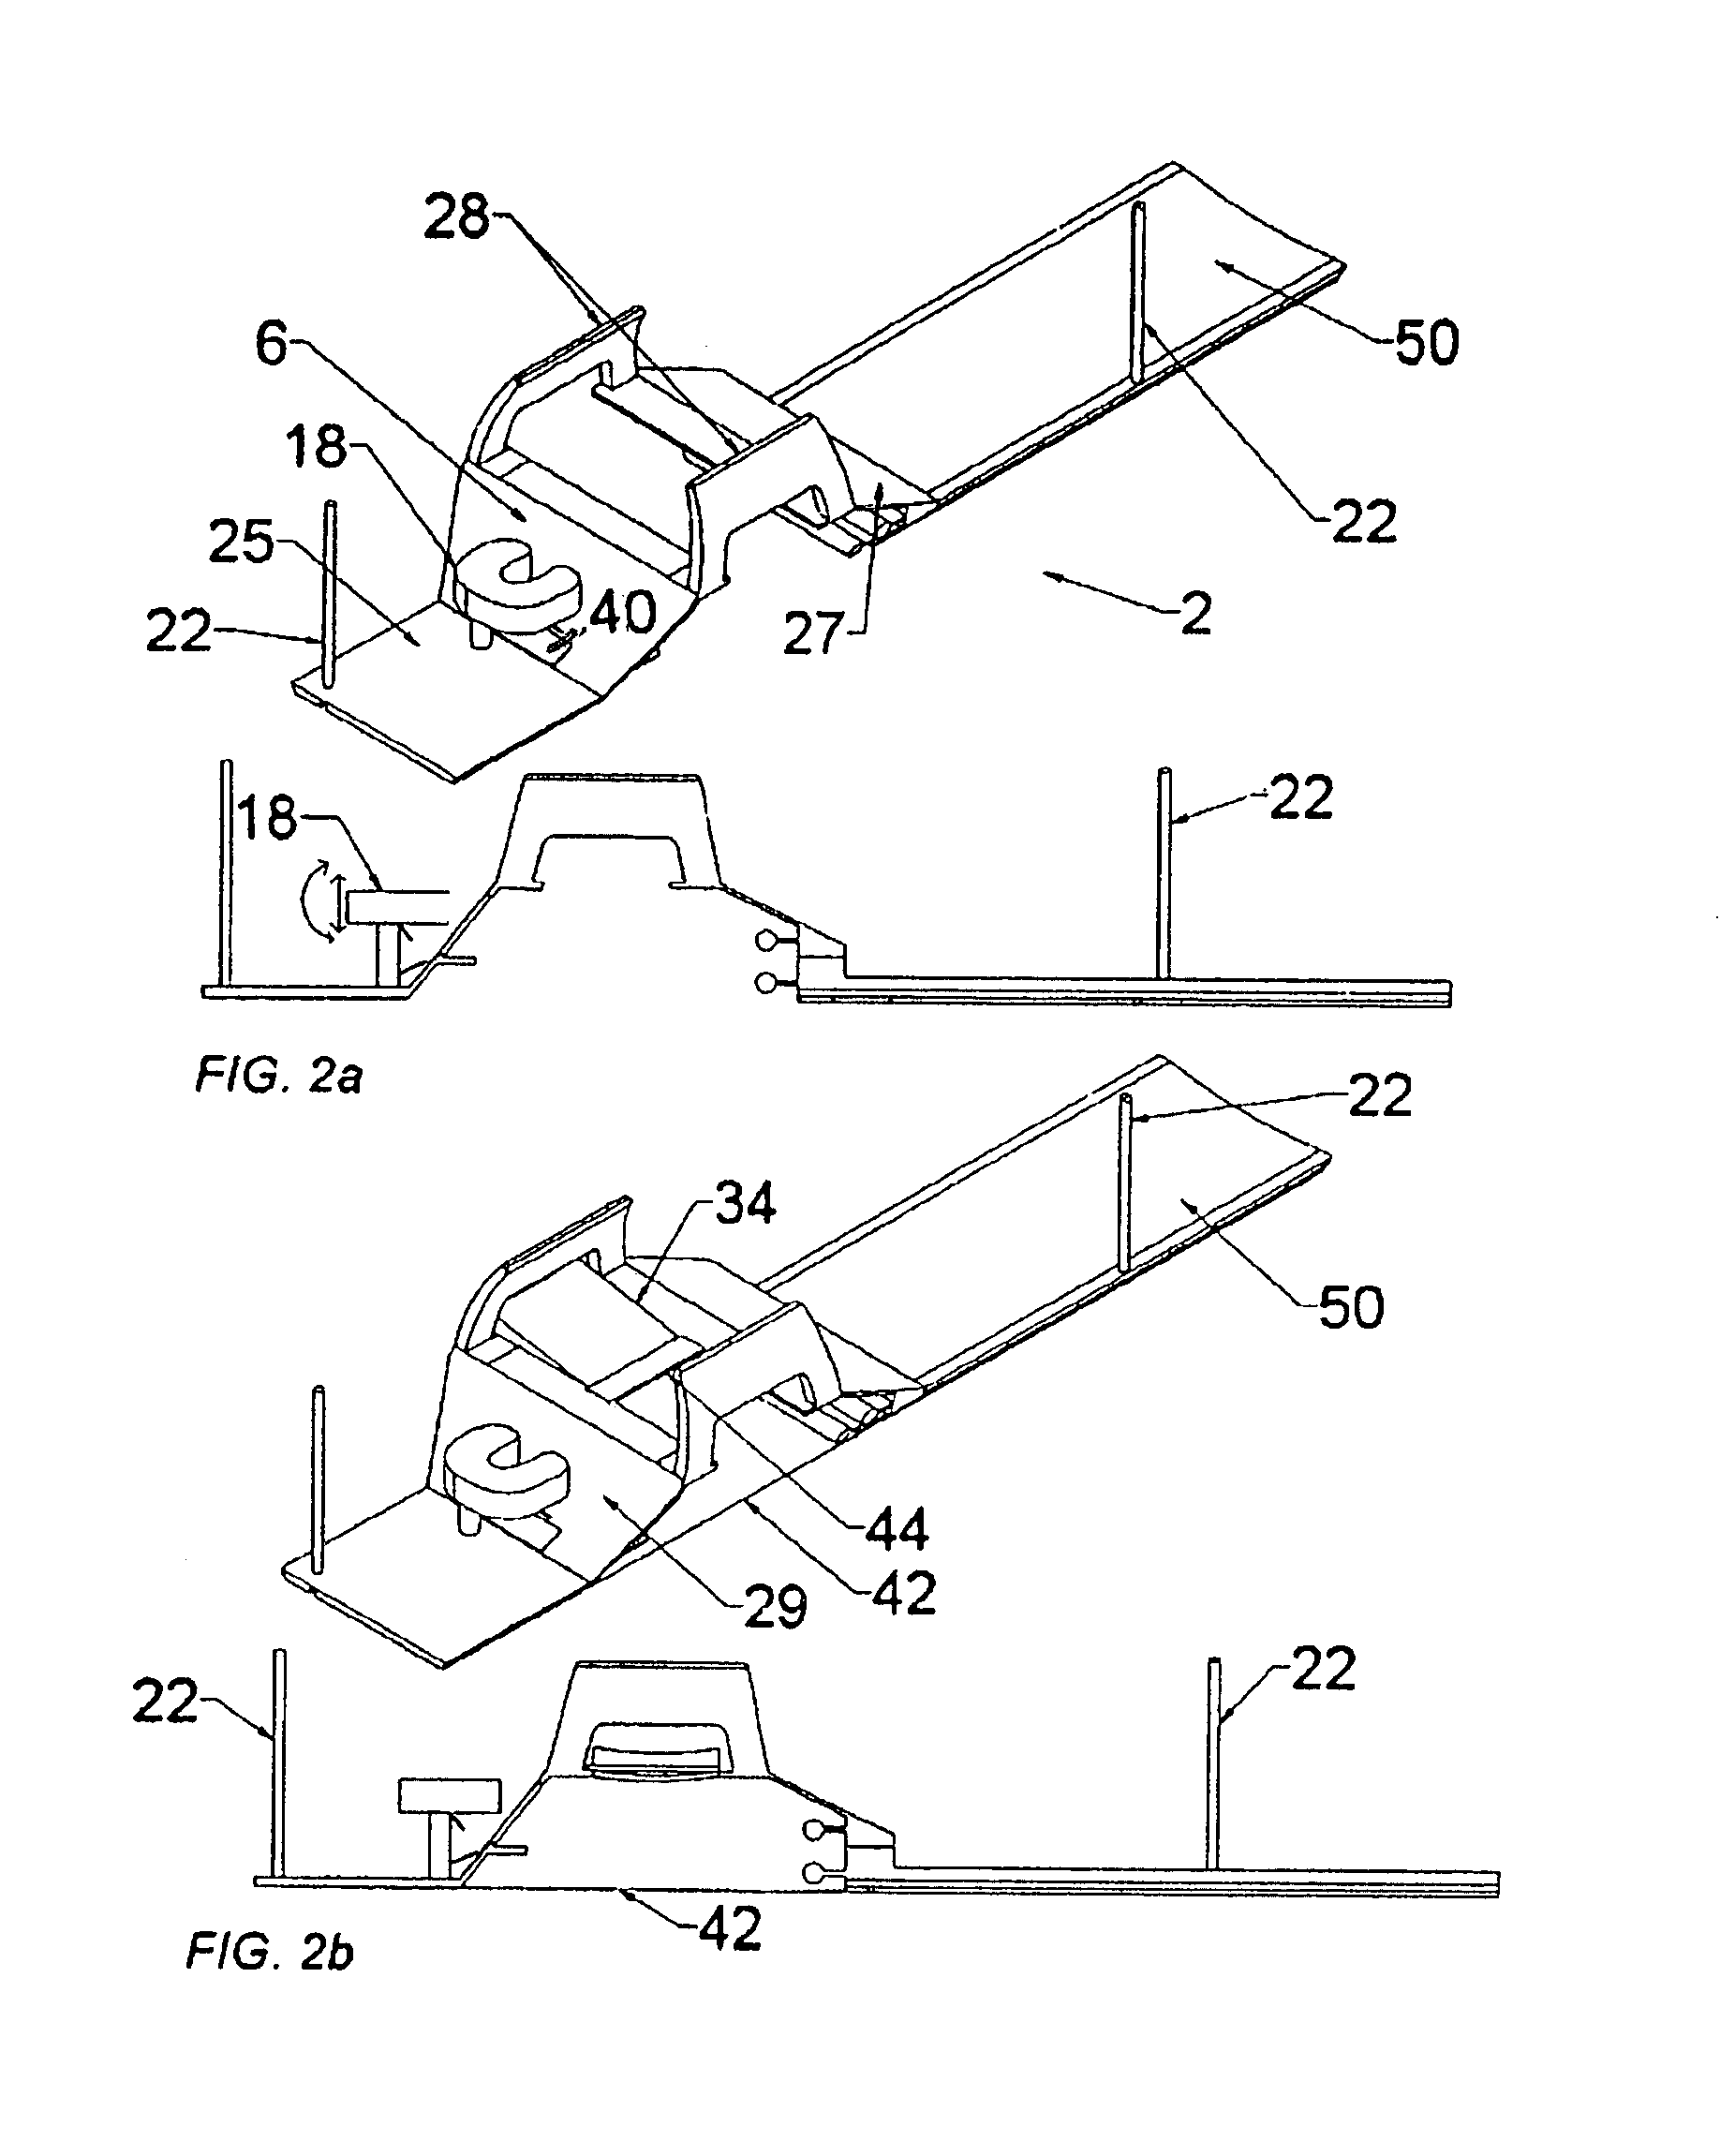 Hybrid imaging method to monitor medical device delivery and patient support for use in the method